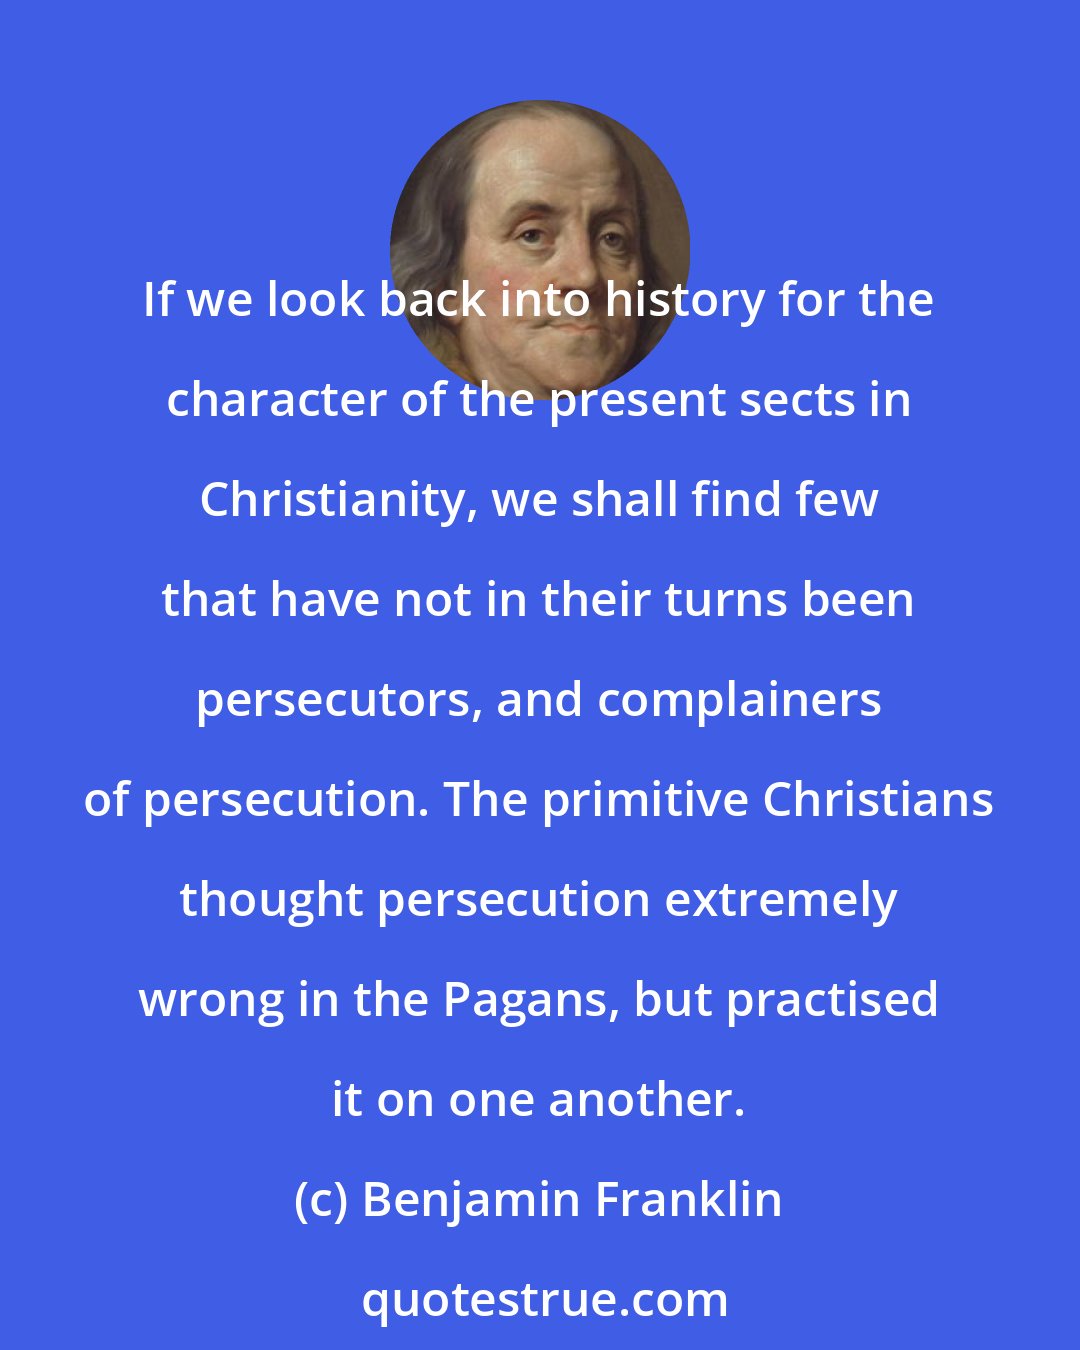 Benjamin Franklin: If we look back into history for the character of the present sects in Christianity, we shall find few that have not in their turns been persecutors, and complainers of persecution. The primitive Christians thought persecution extremely wrong in the Pagans, but practised it on one another.